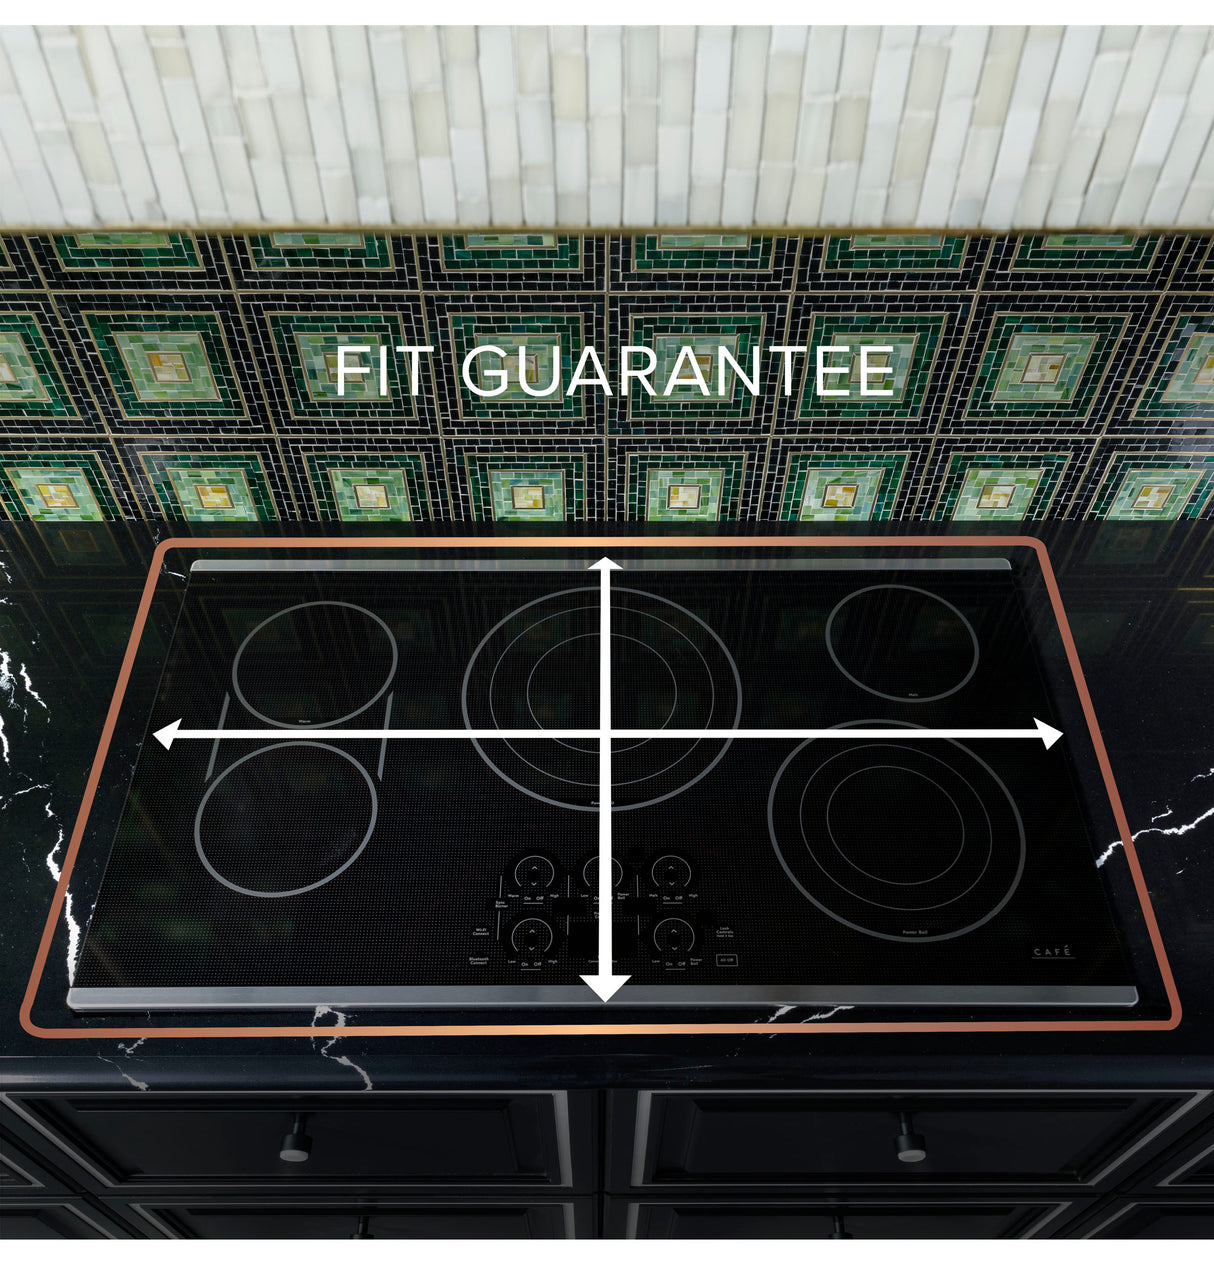 Caf(eback)(TM) 36" Touch-Control Electric Cooktop - (CEP90362TSS)